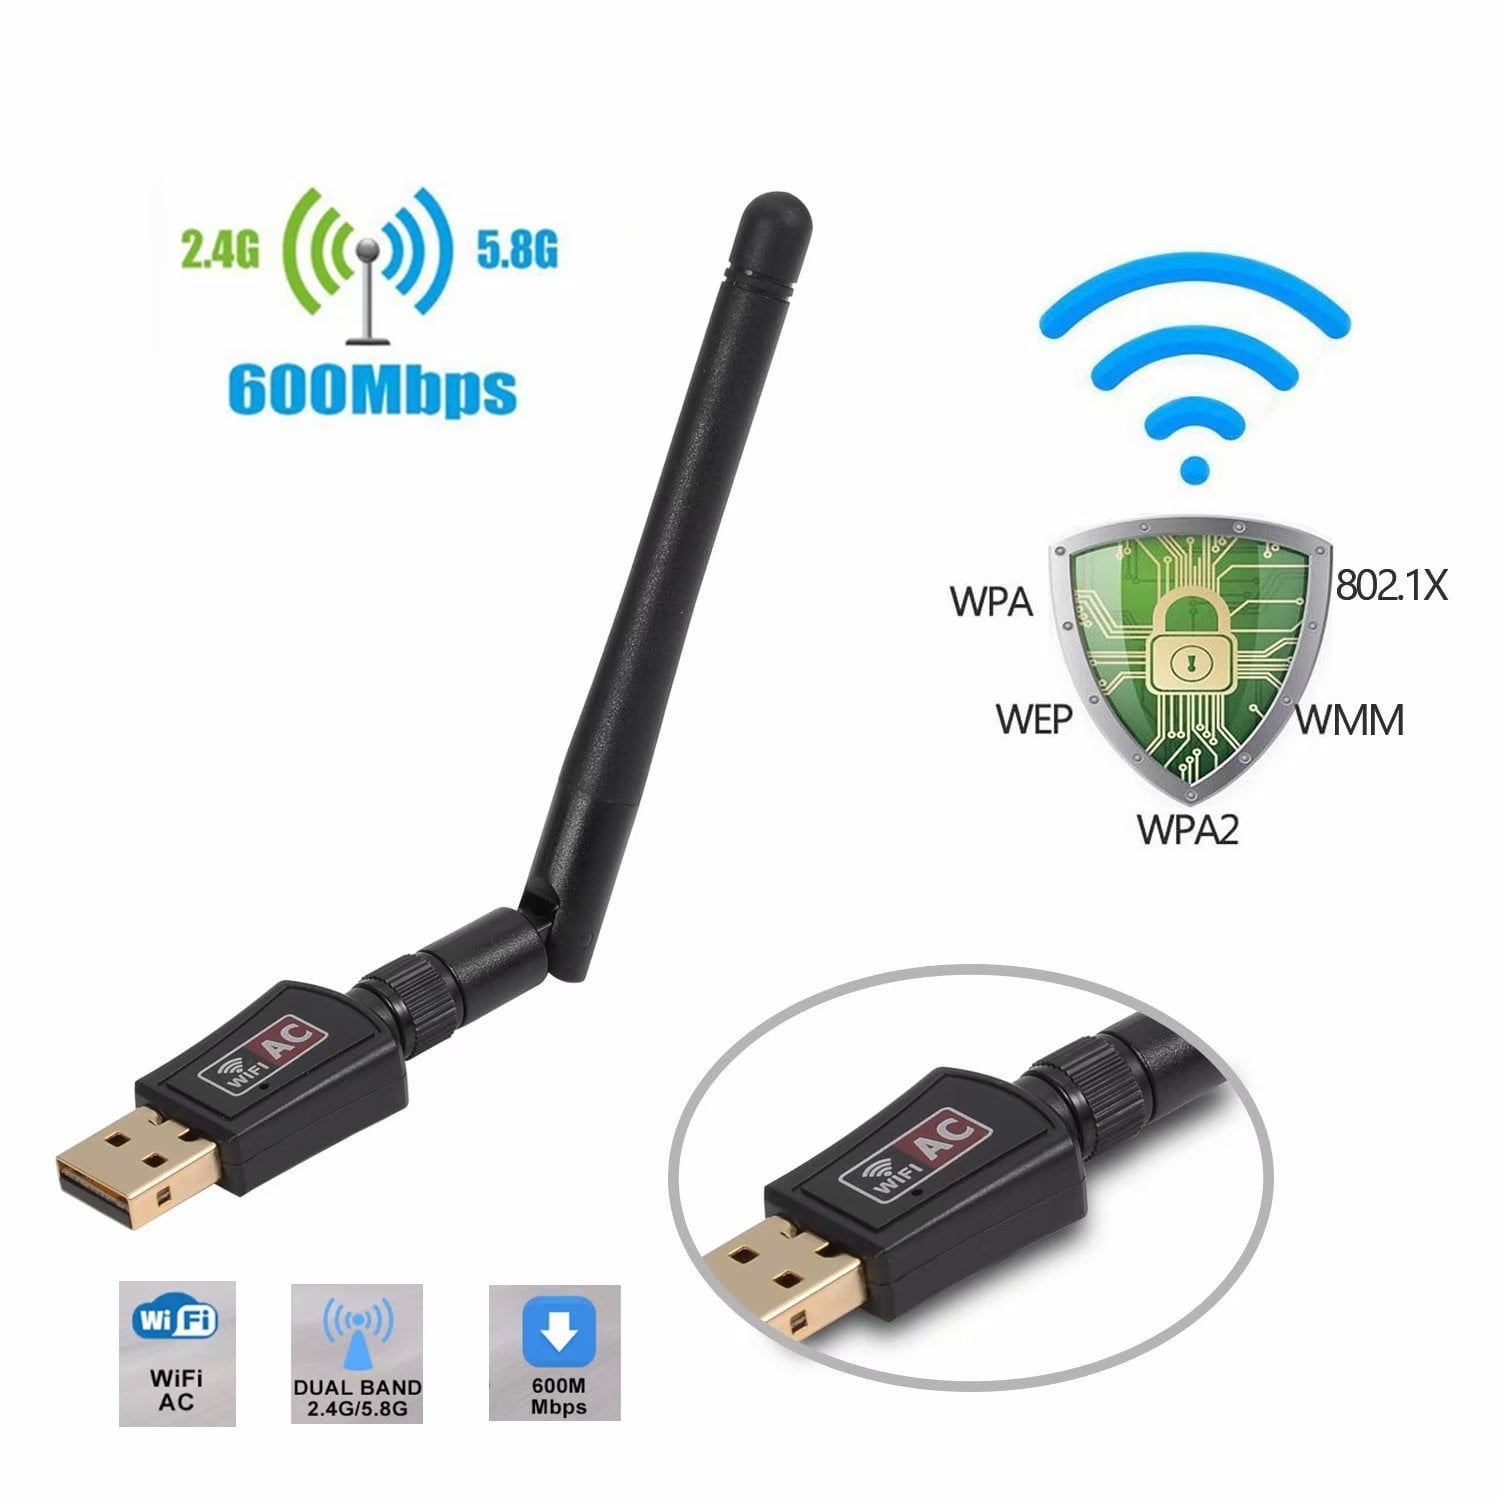 Wireless USB Wifi Adapter AC600Mbps Dual Band 2.4G/5GHz for PC Laptop & Desktop 